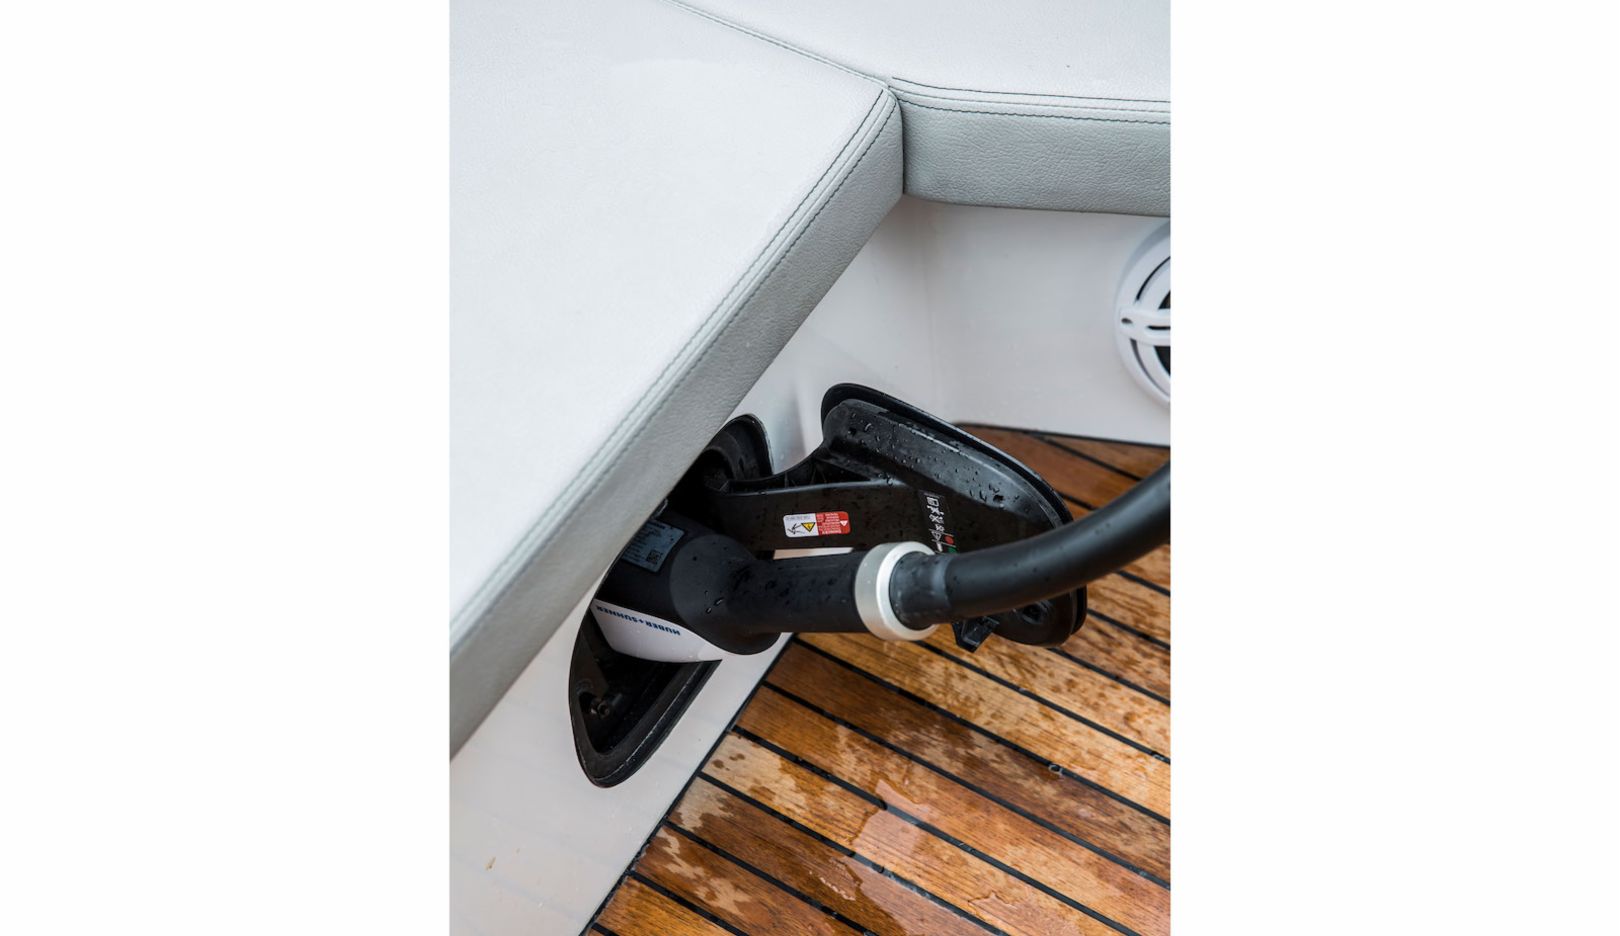 The charging socket is easily accessible on the boat.